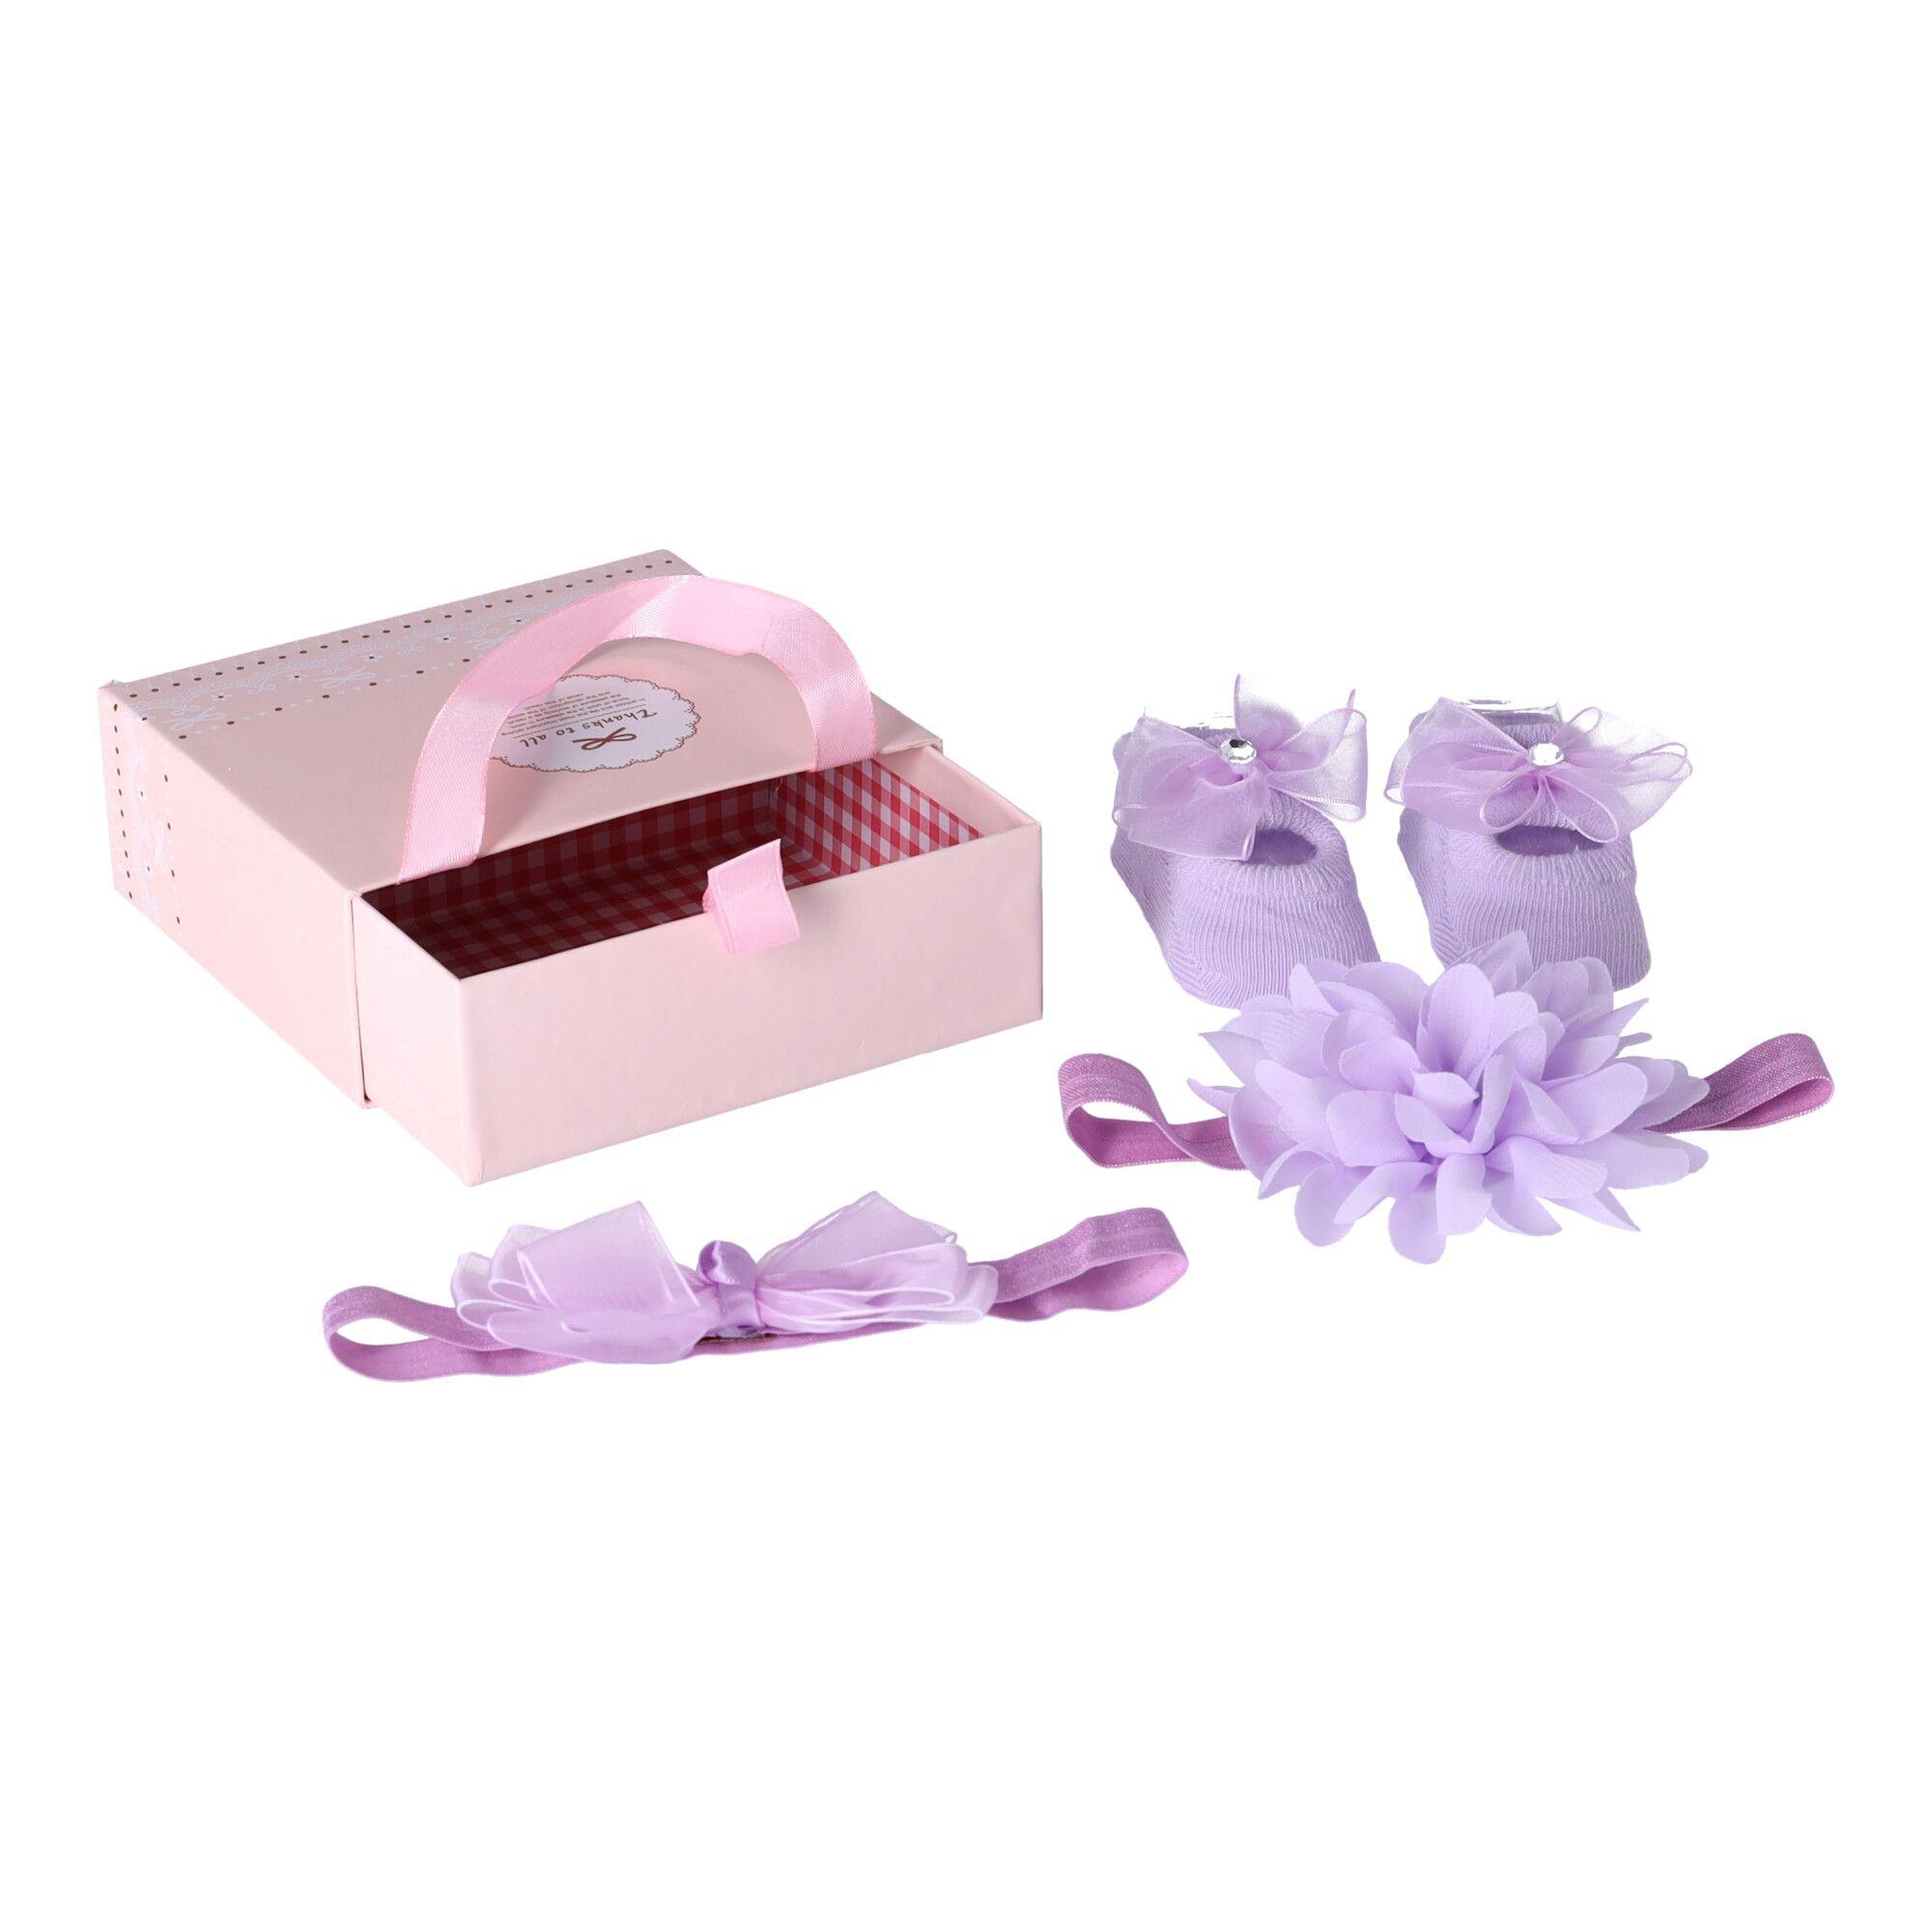 Gift set 3in1 for a newborn baby - purple